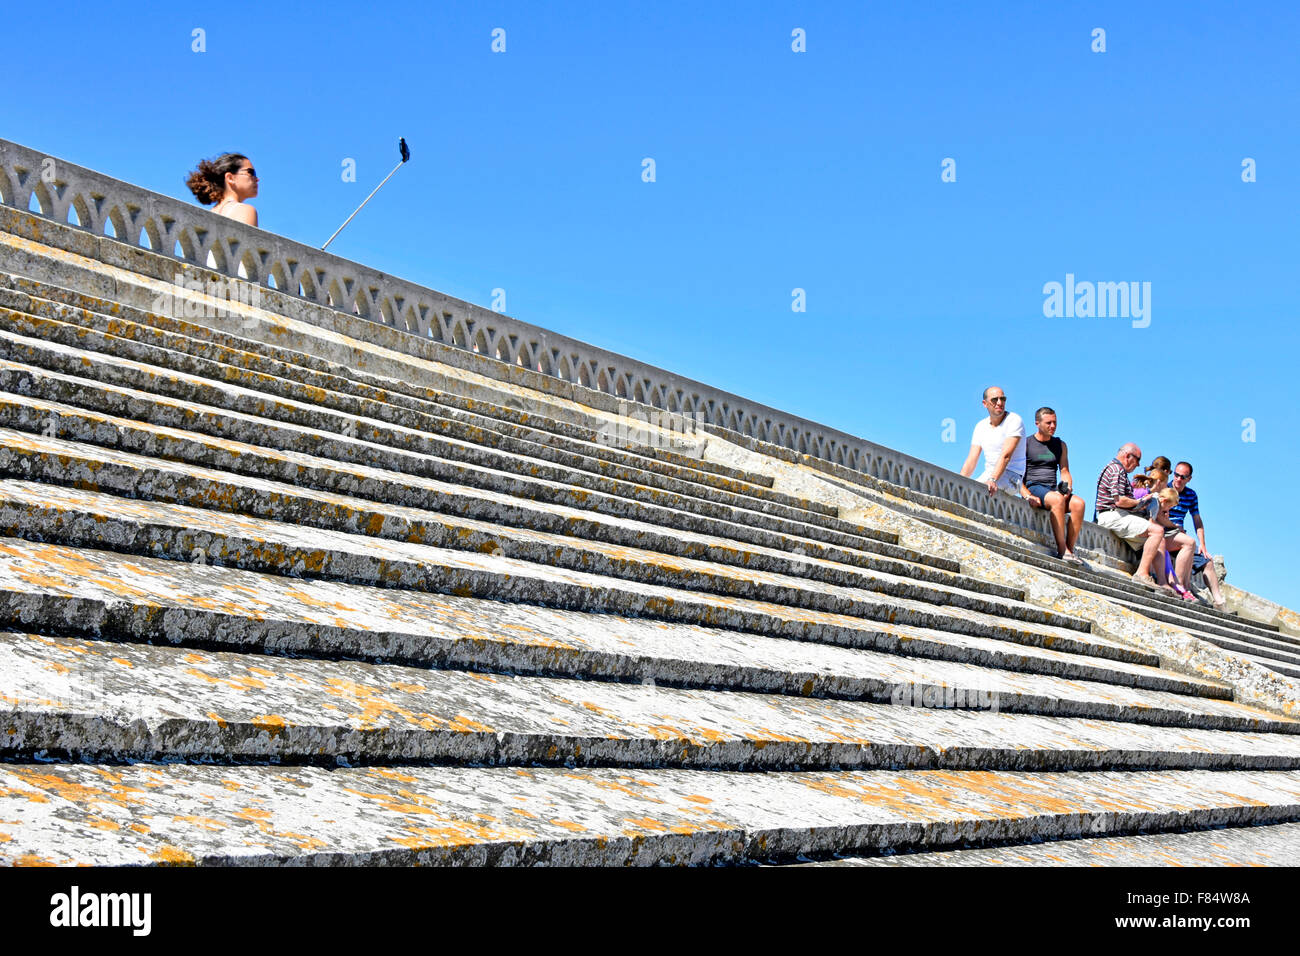 Woman taking a selfie picture & holiday tourists paying for sightseeing on roof of the church Les Saintes-Maries-de-la-Mer in Saintes Maries de la Mer Stock Photo